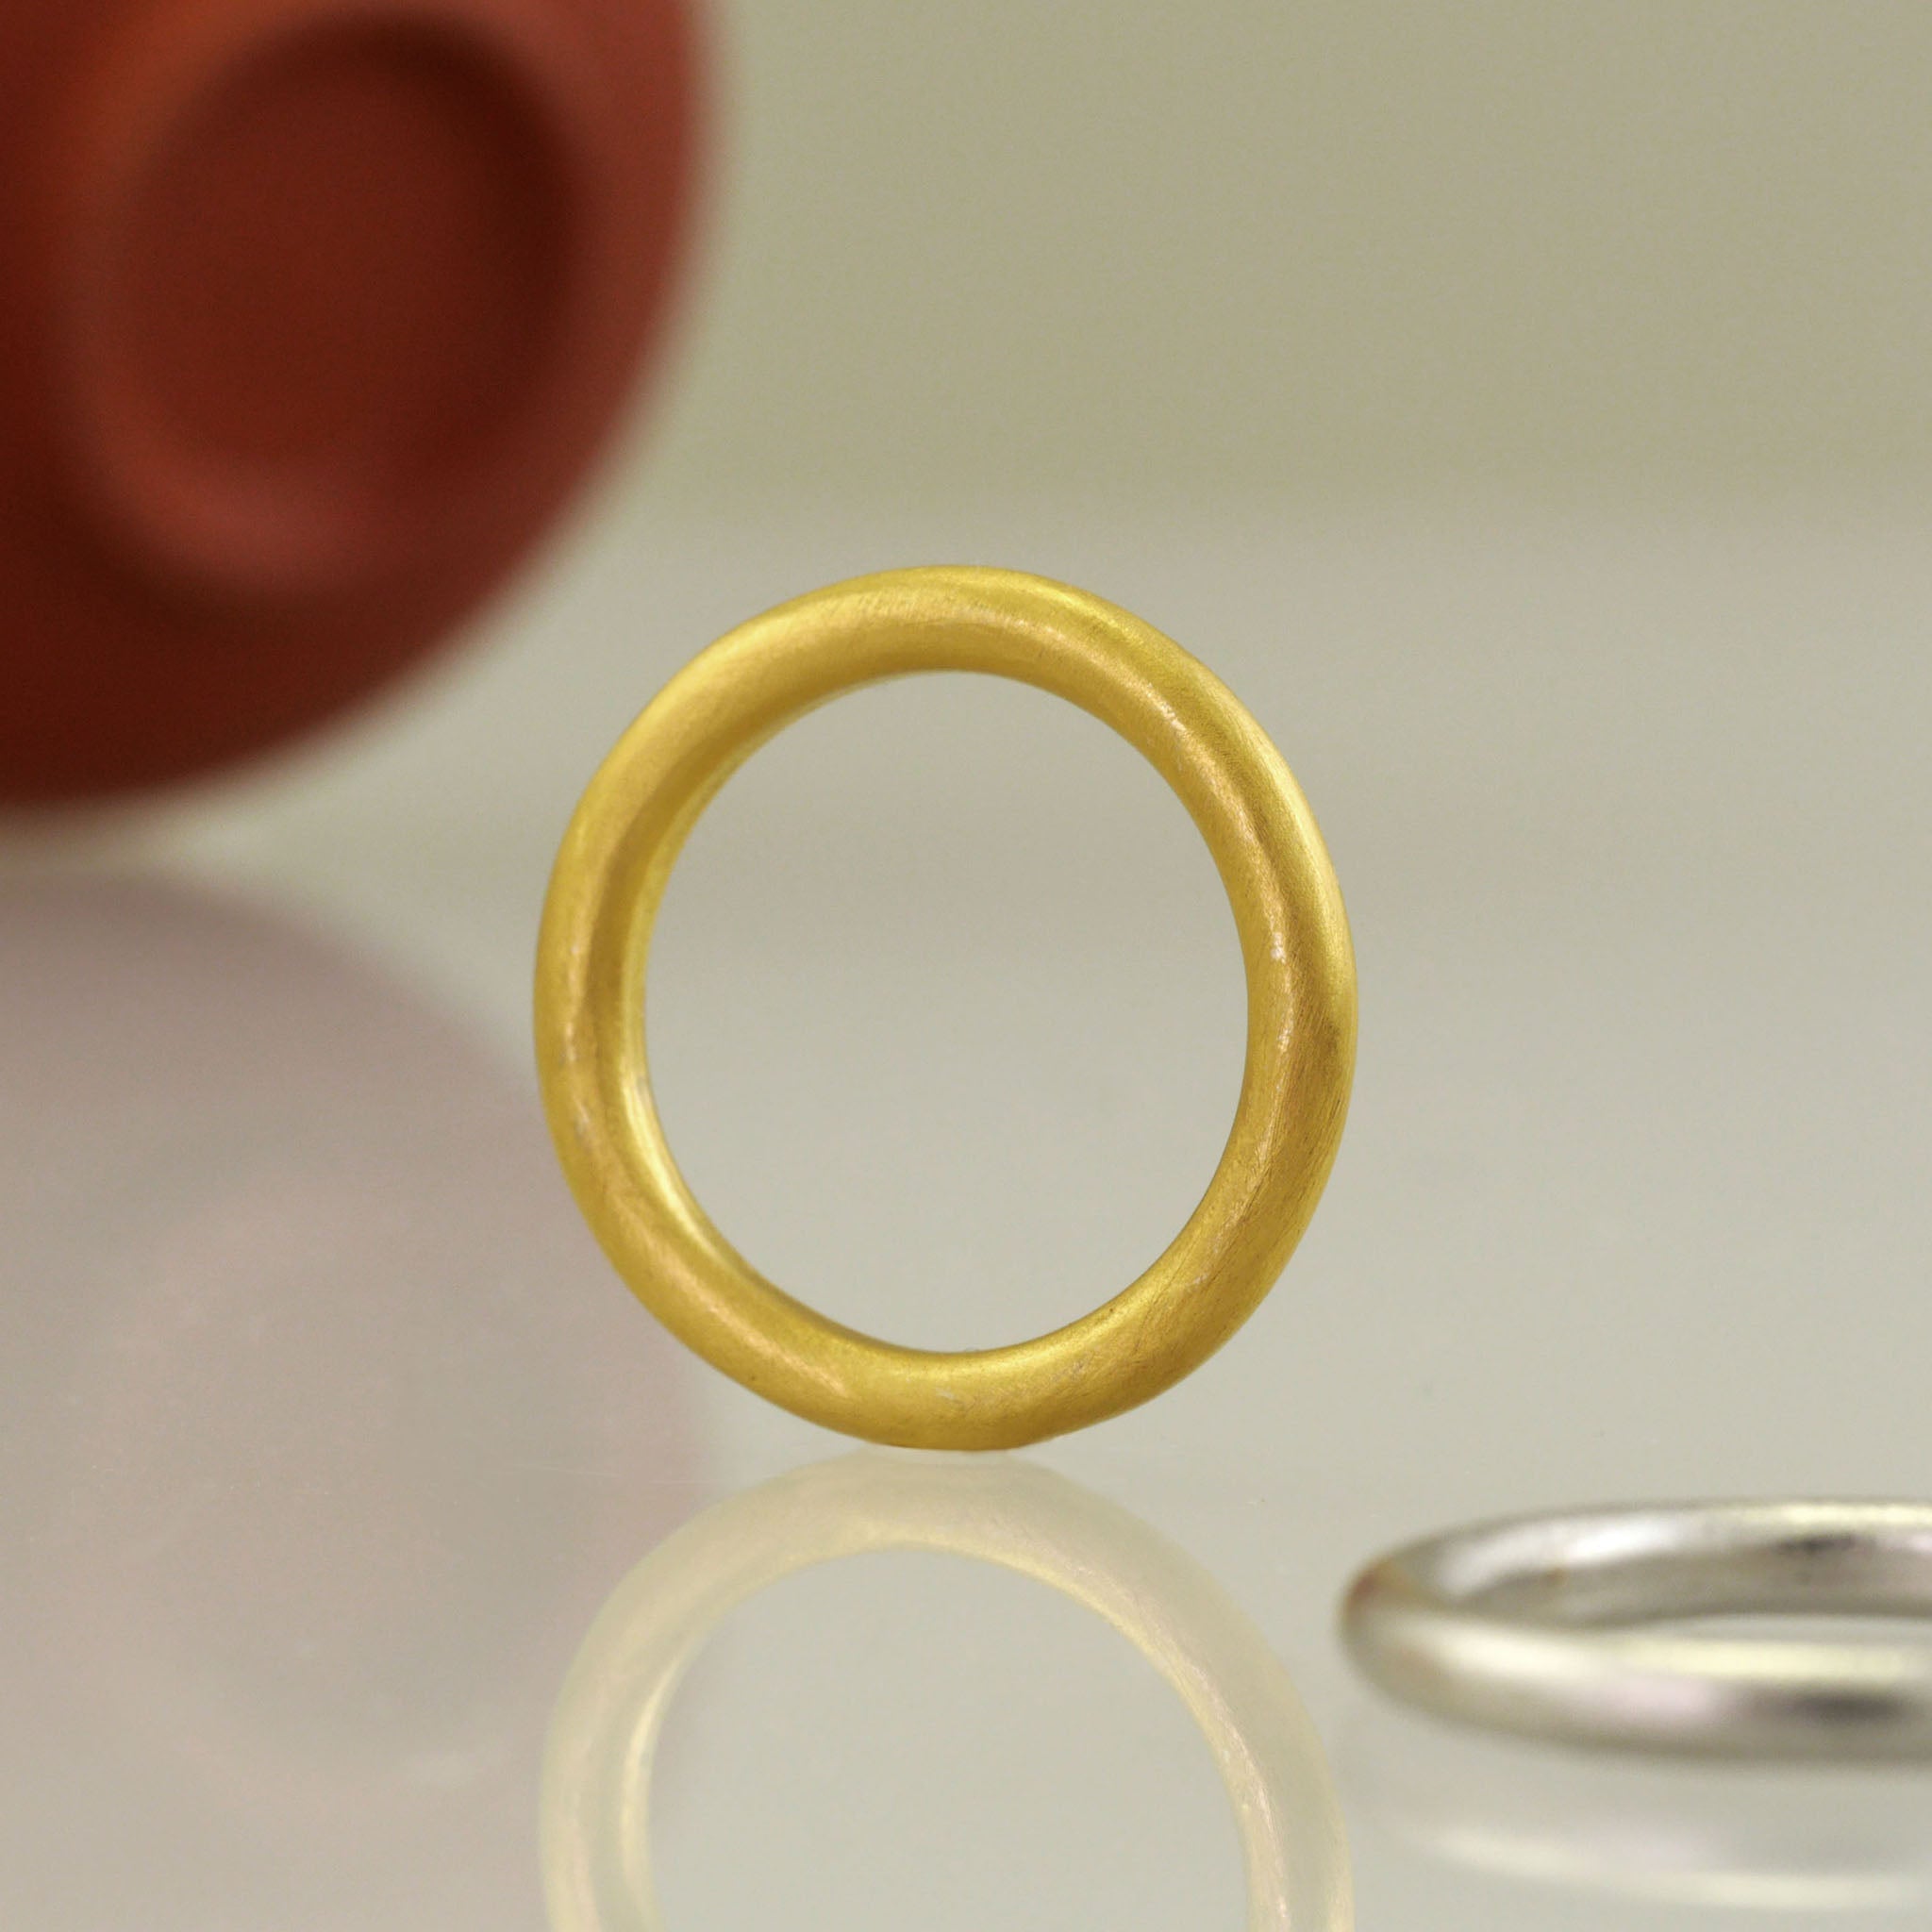 Close up of Round profile yellow gold wedding ring with minimalist design, perfect for your special occasion.